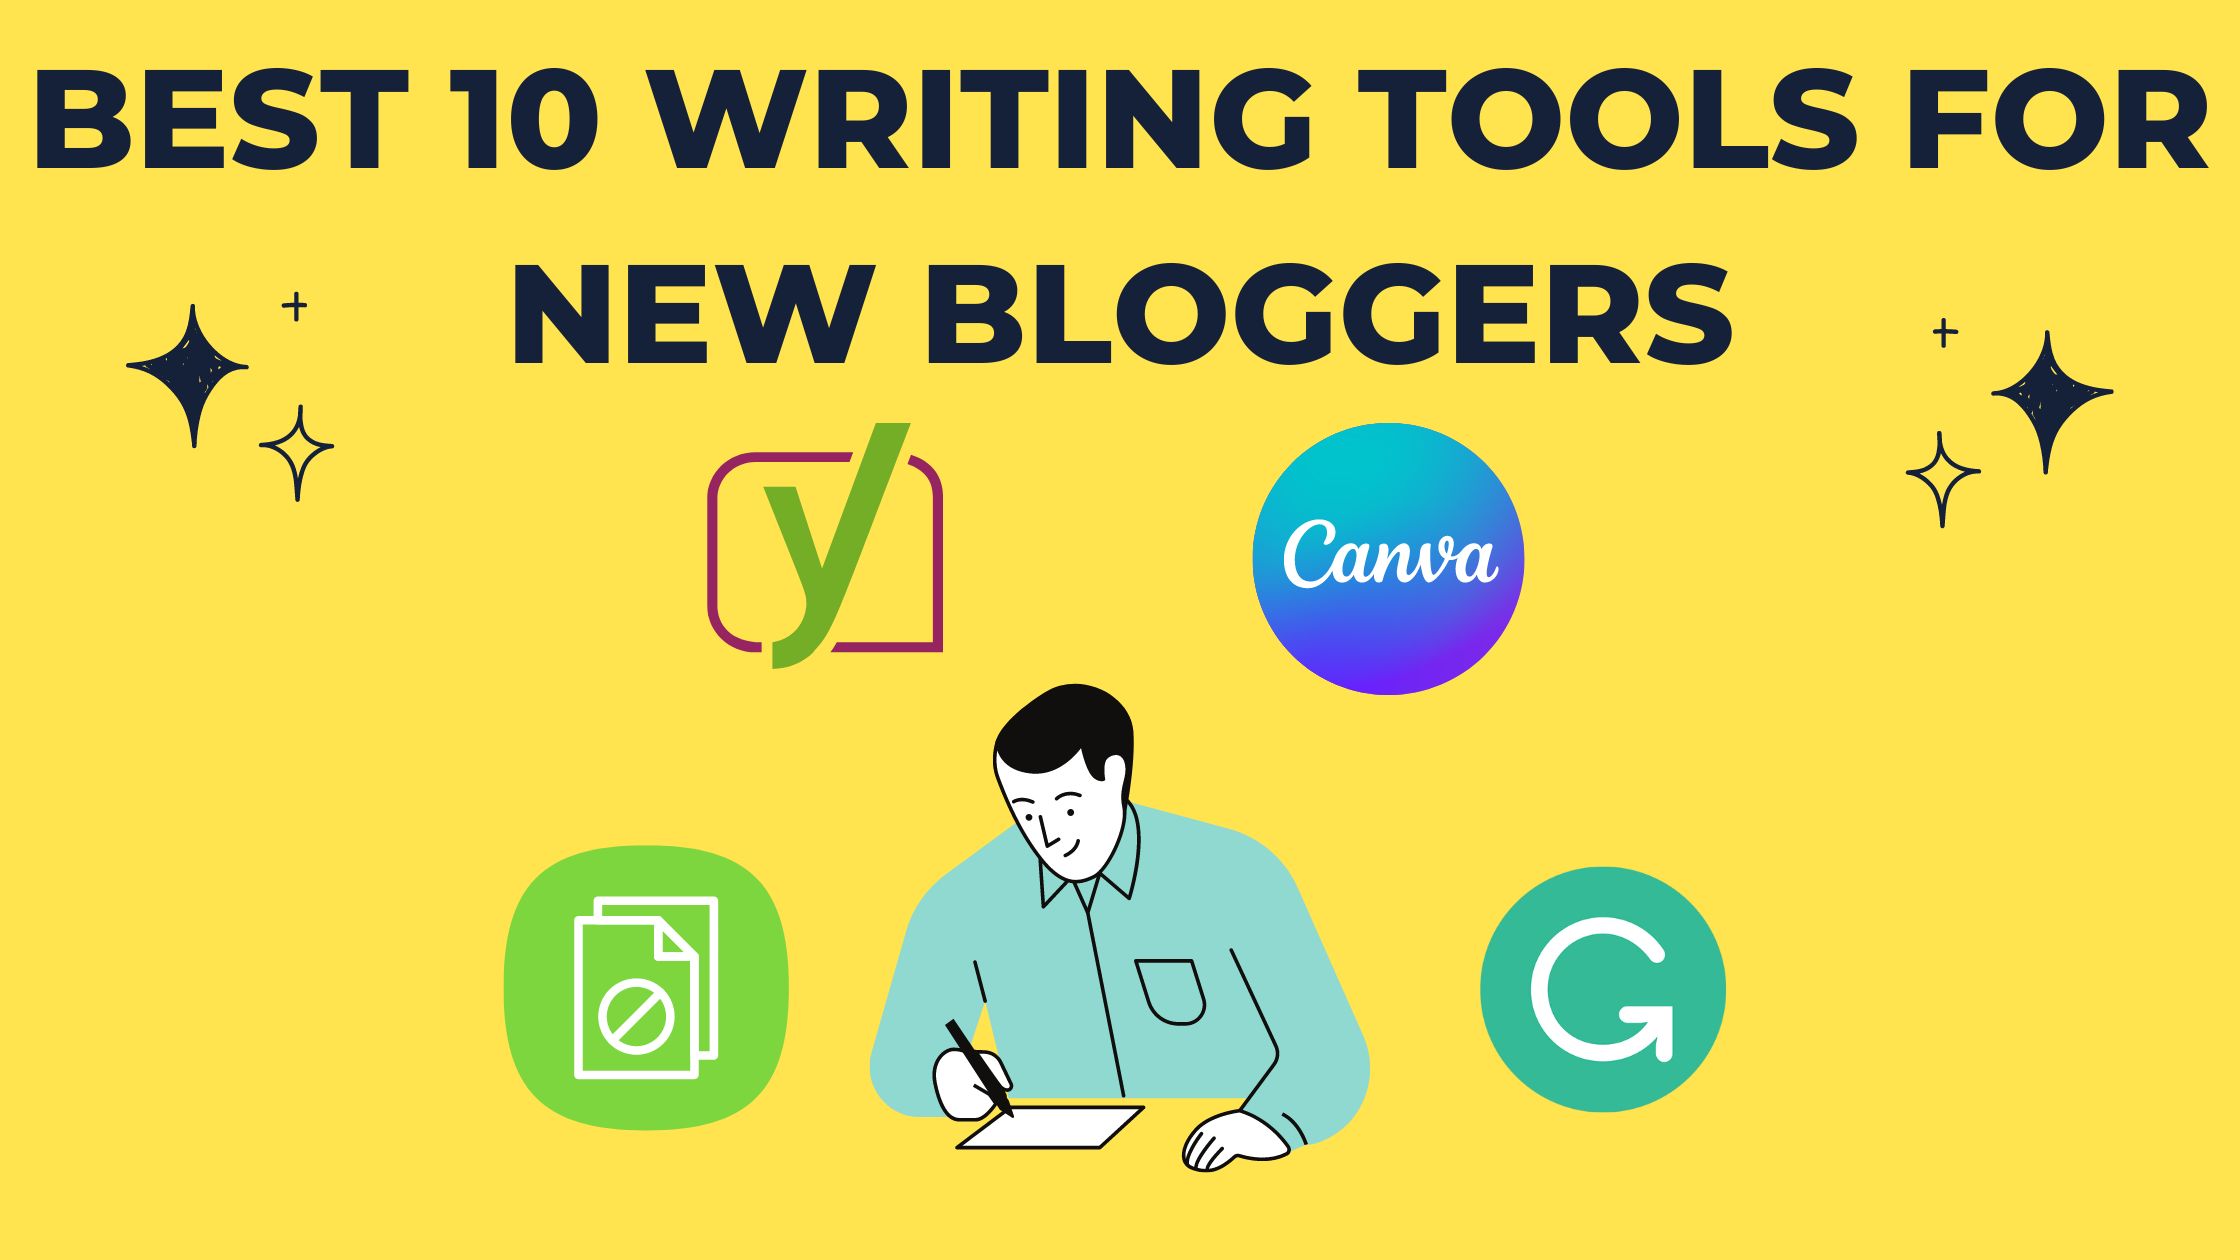 Best 10 Writing Tools for New Bloggers